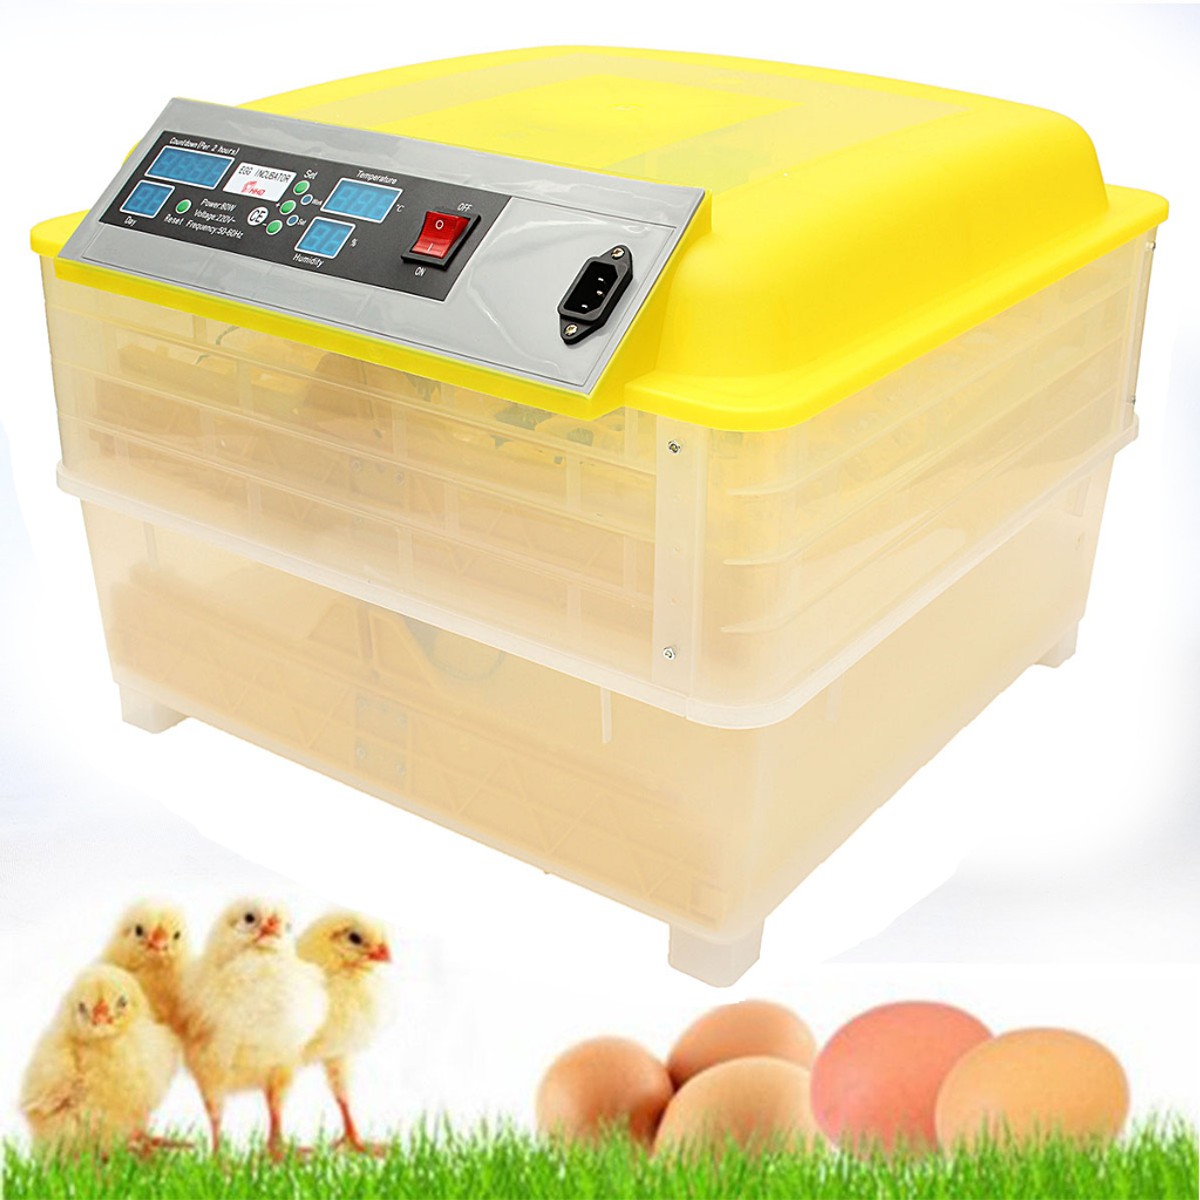 Fully-Automatic-Digital-Egg-Incubator-96-Eggs-Poultry-Duck-Hatcher-DT-110V-80W-1657249-1